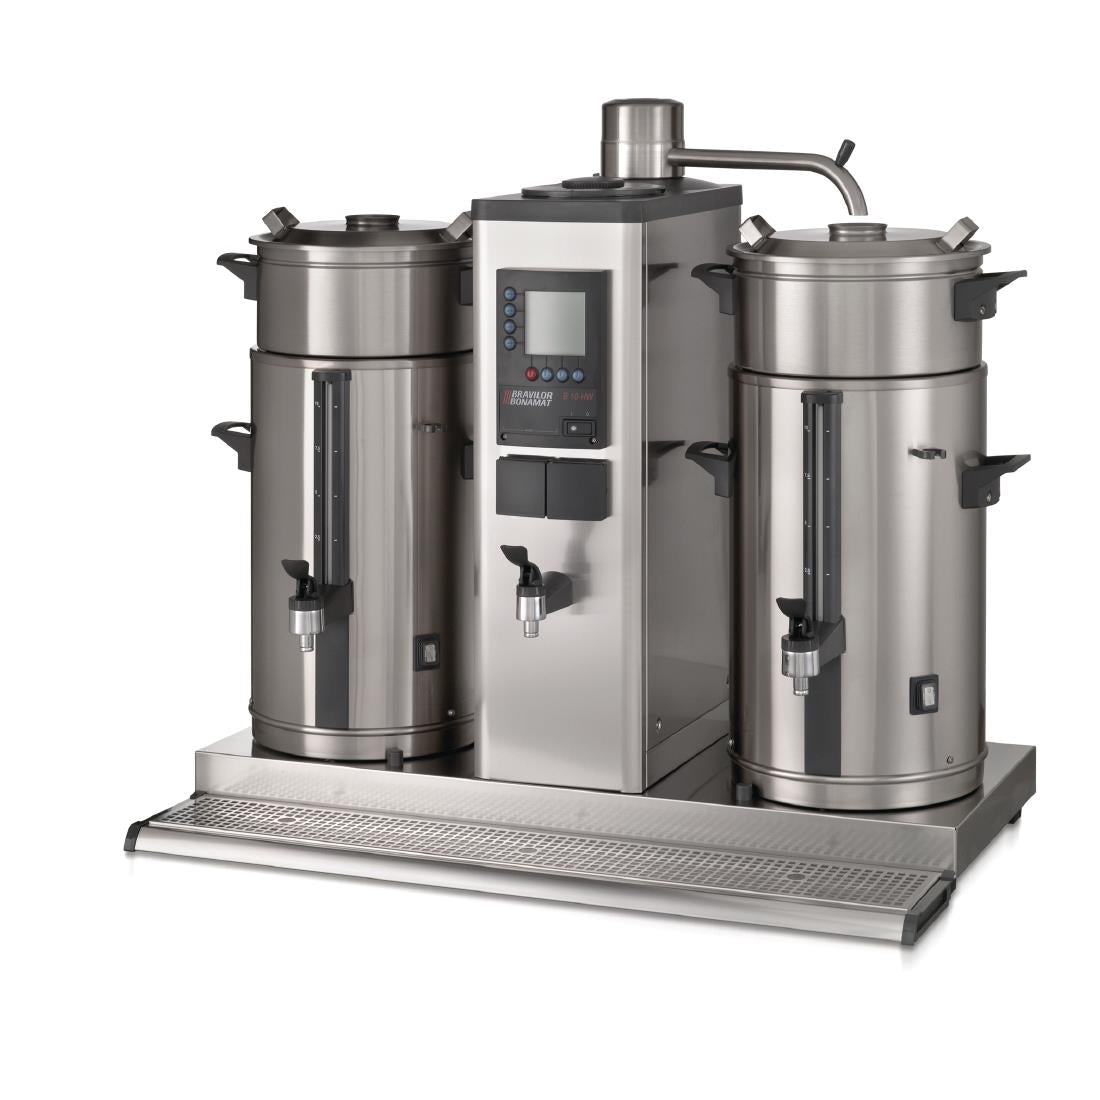 Bravilor B10 HW Bulk Coffee Brewer with 2x10Ltr Coffee Urns and Hot Water Tap 3 Phase